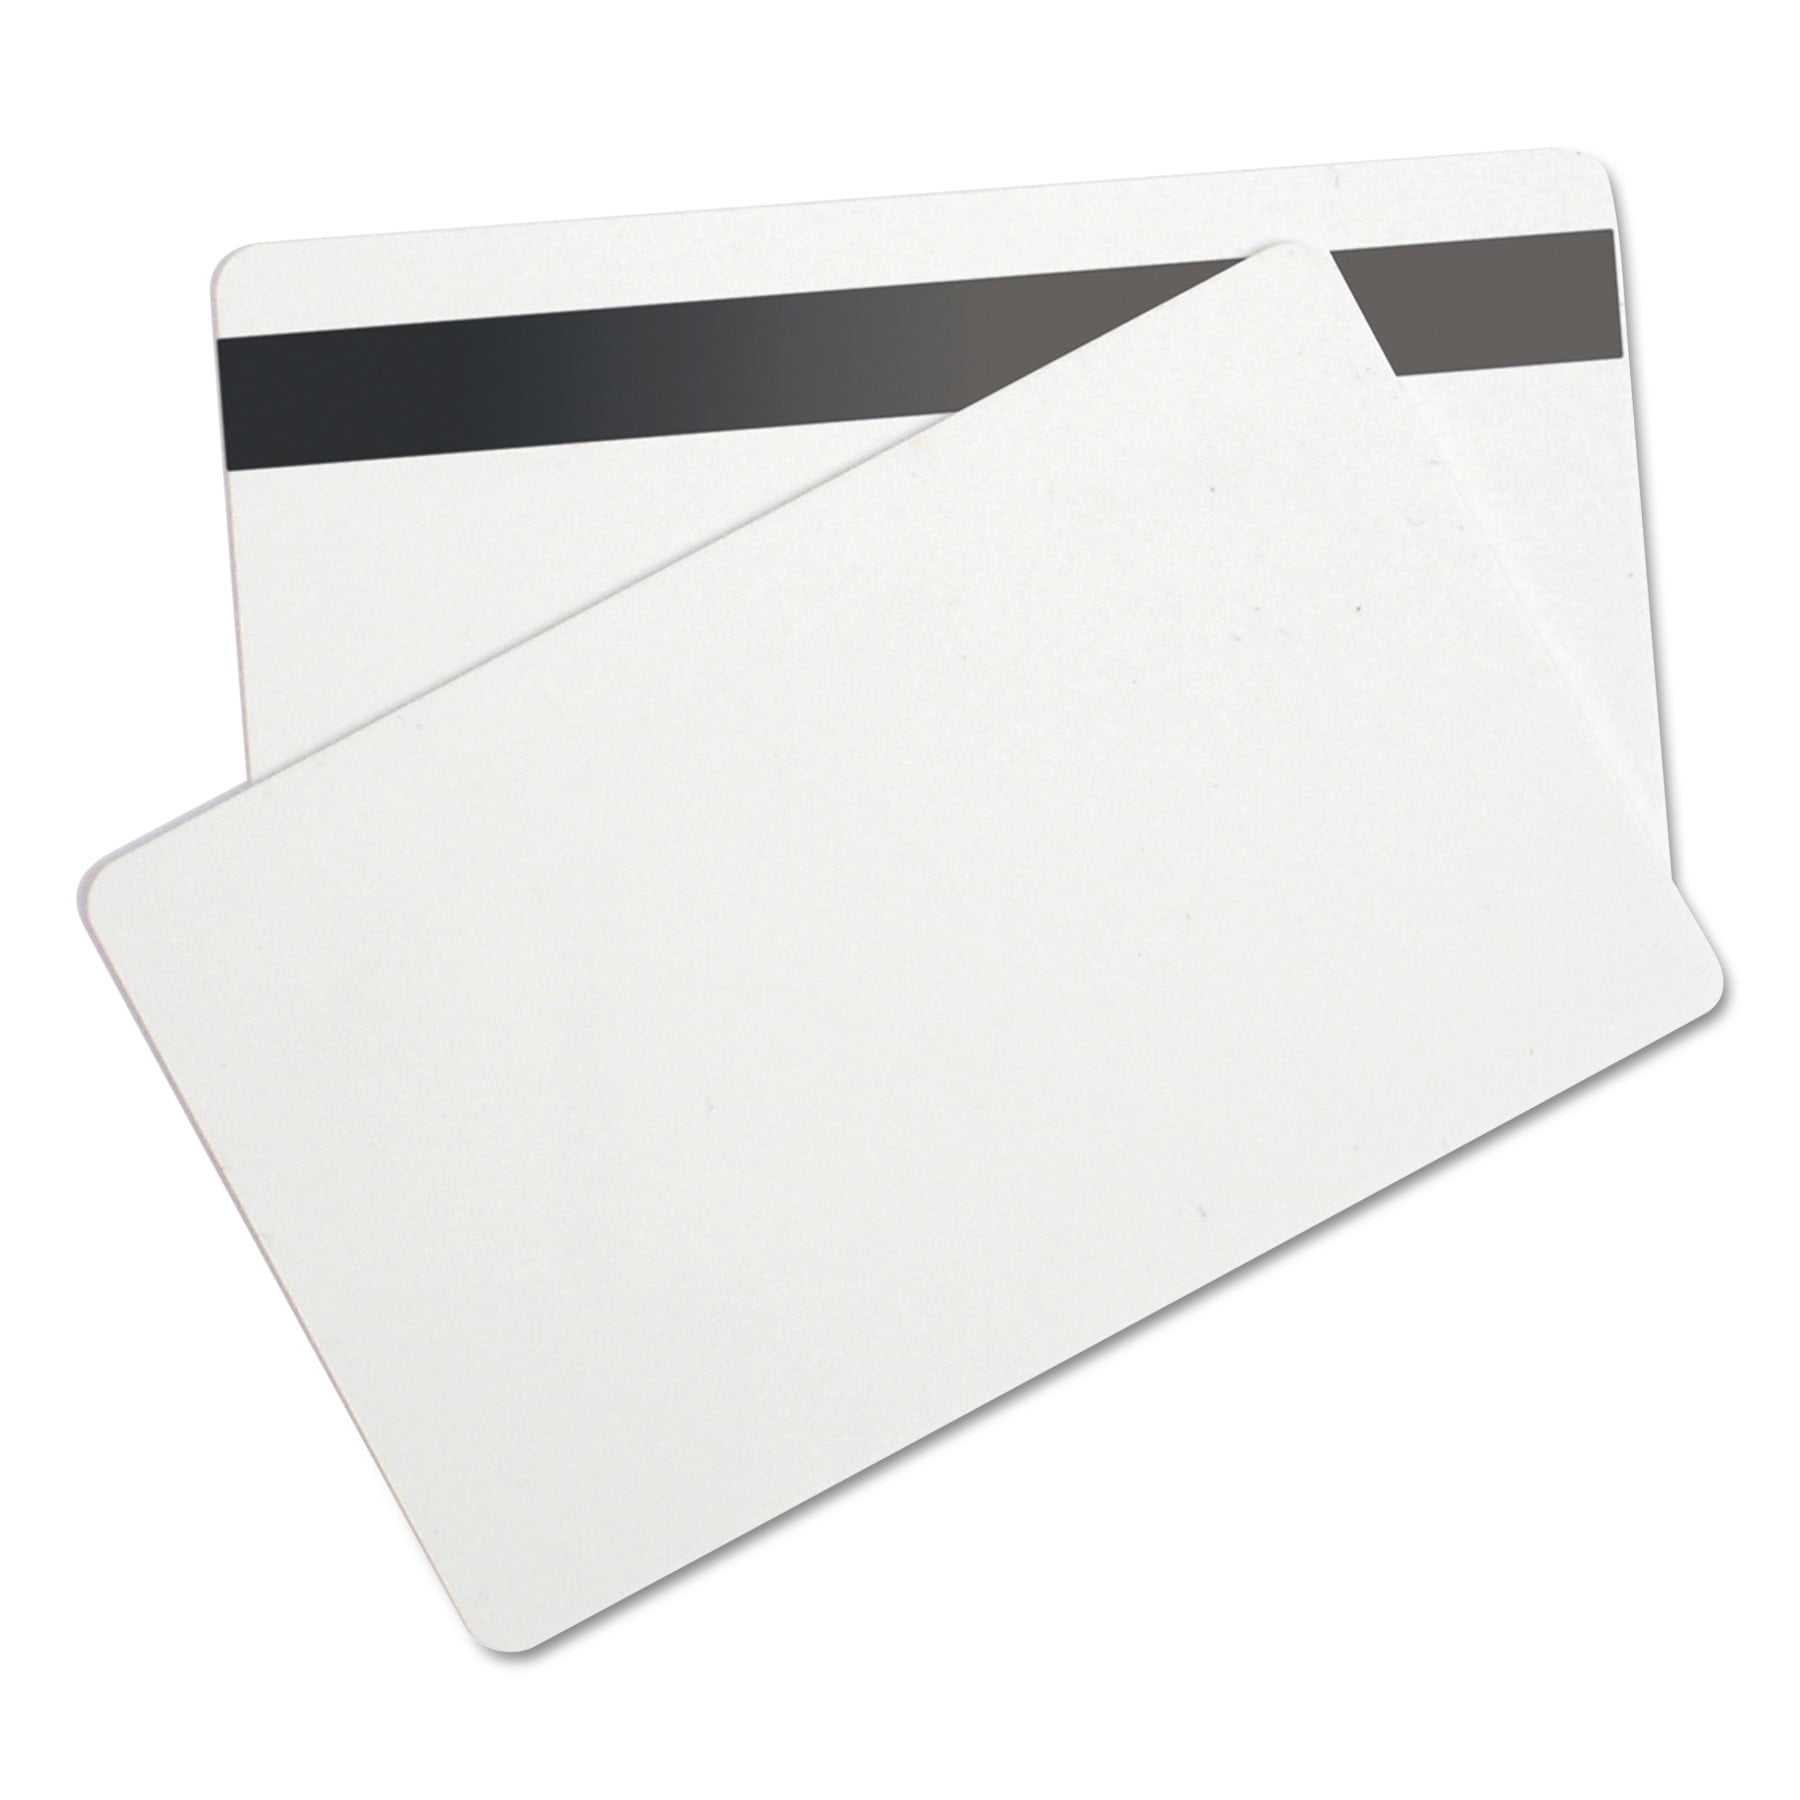 Graphics Quality 30 Mil Credit Card size CR80 500 Copper Blank PVC Cards 